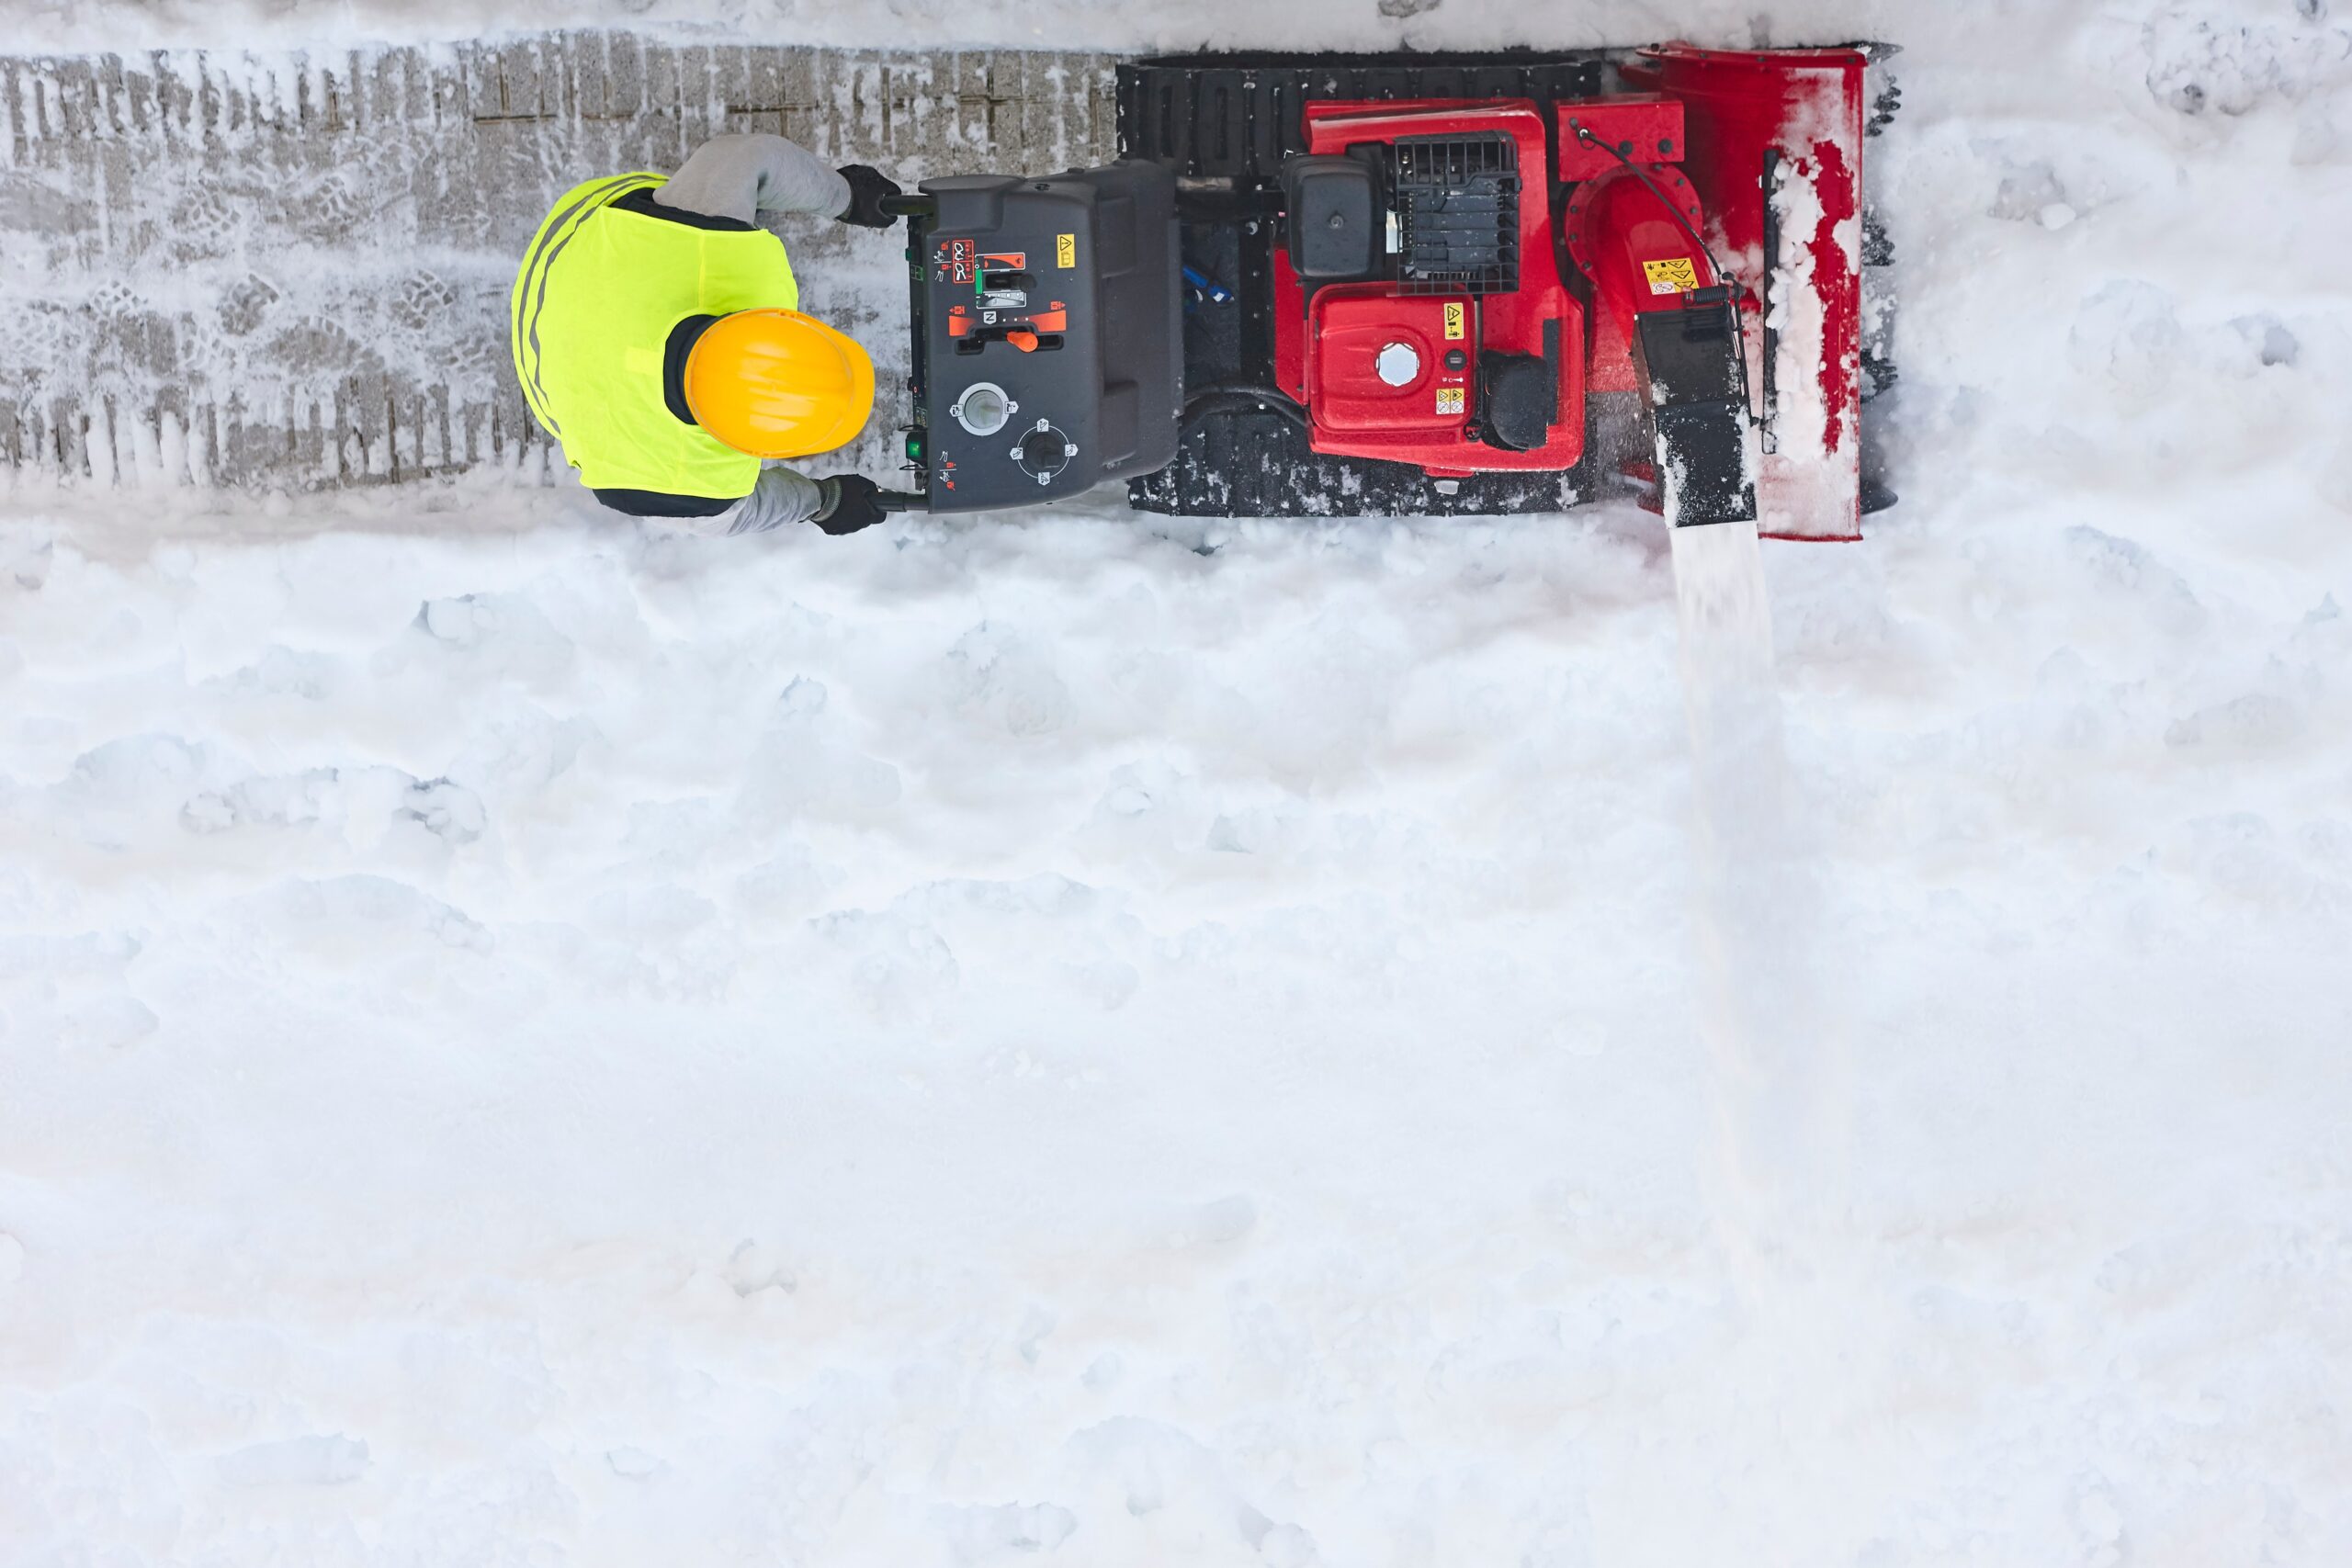 Aerial shot of a person using a motorized plowing machine to clear snow on the sidewalk.